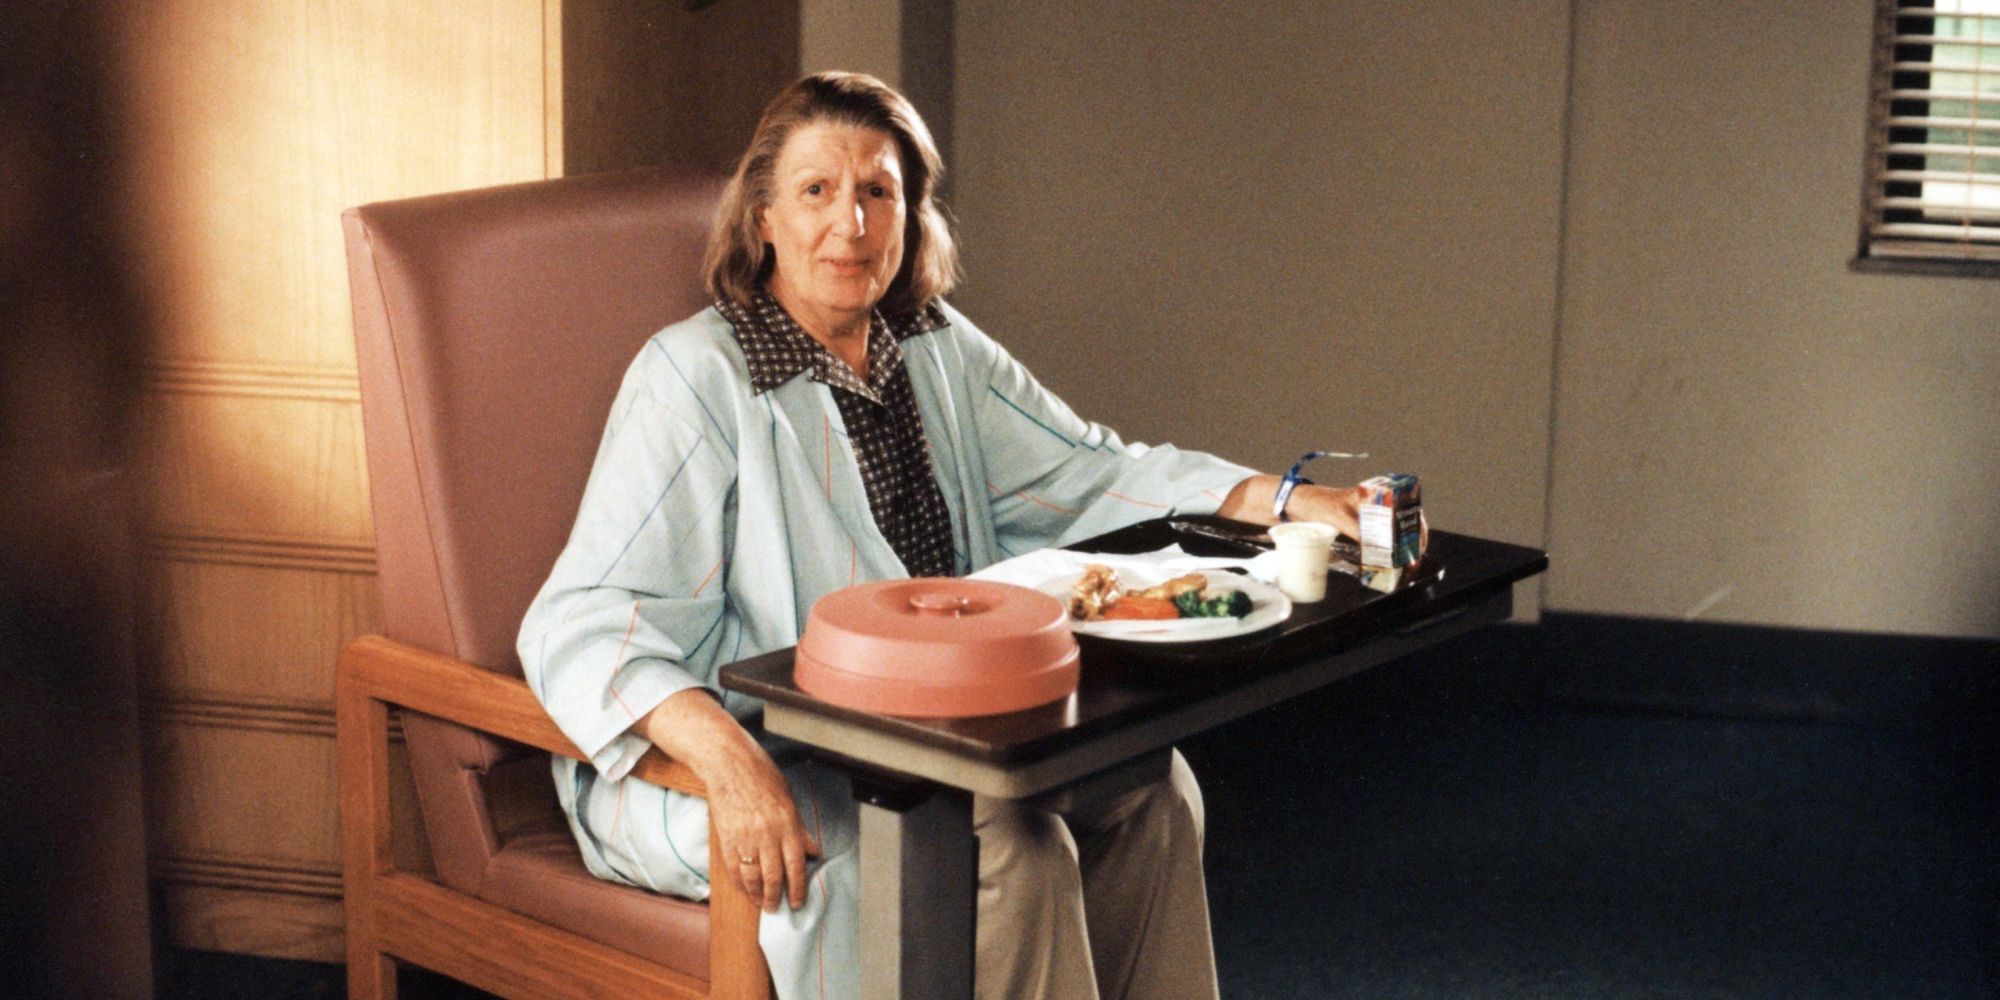 a woman sits in the chair with meal placed in front of her